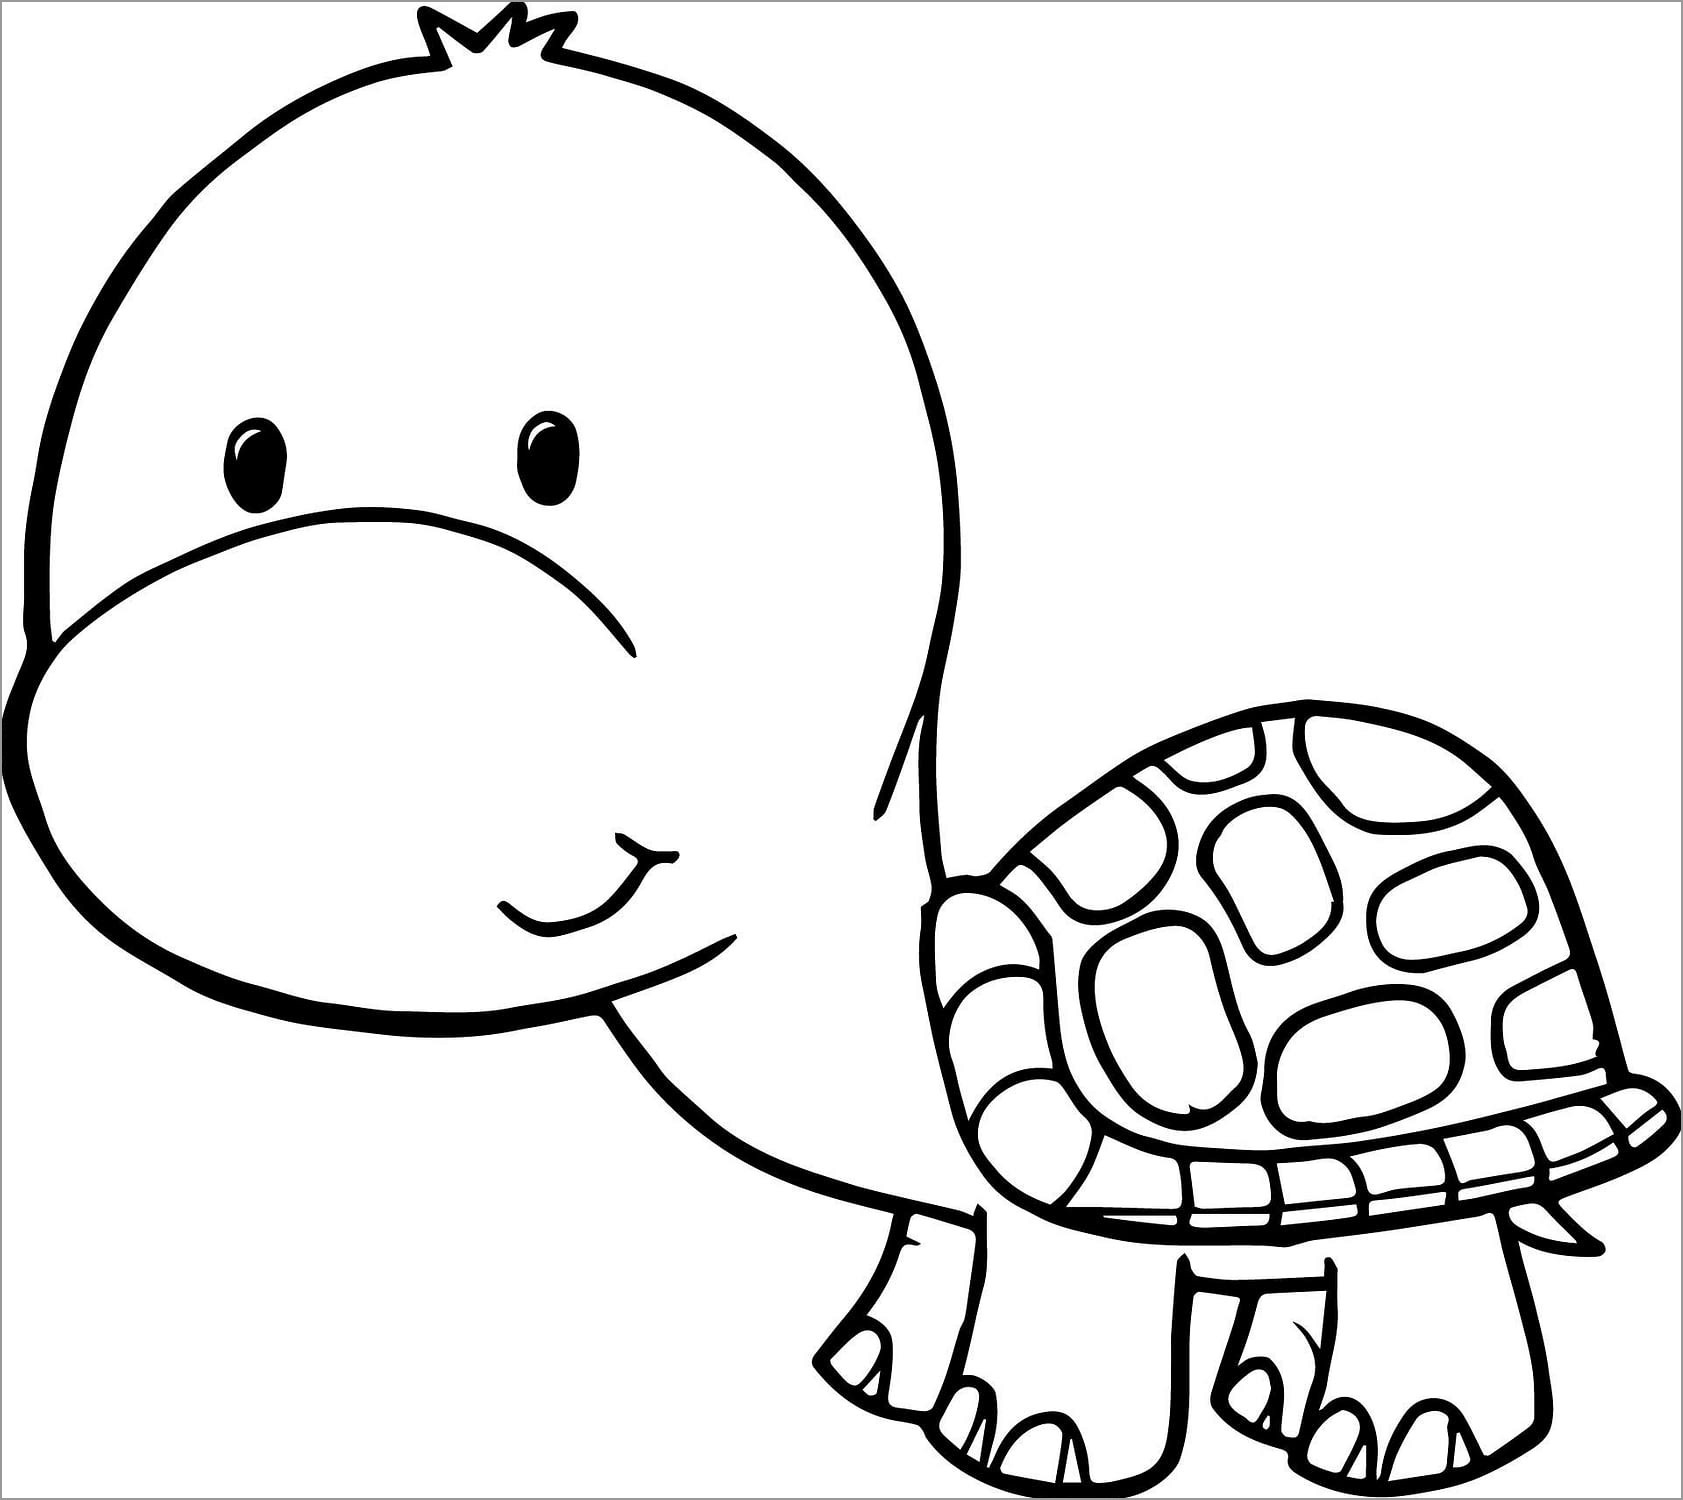 Coloring Pages Of tortoise